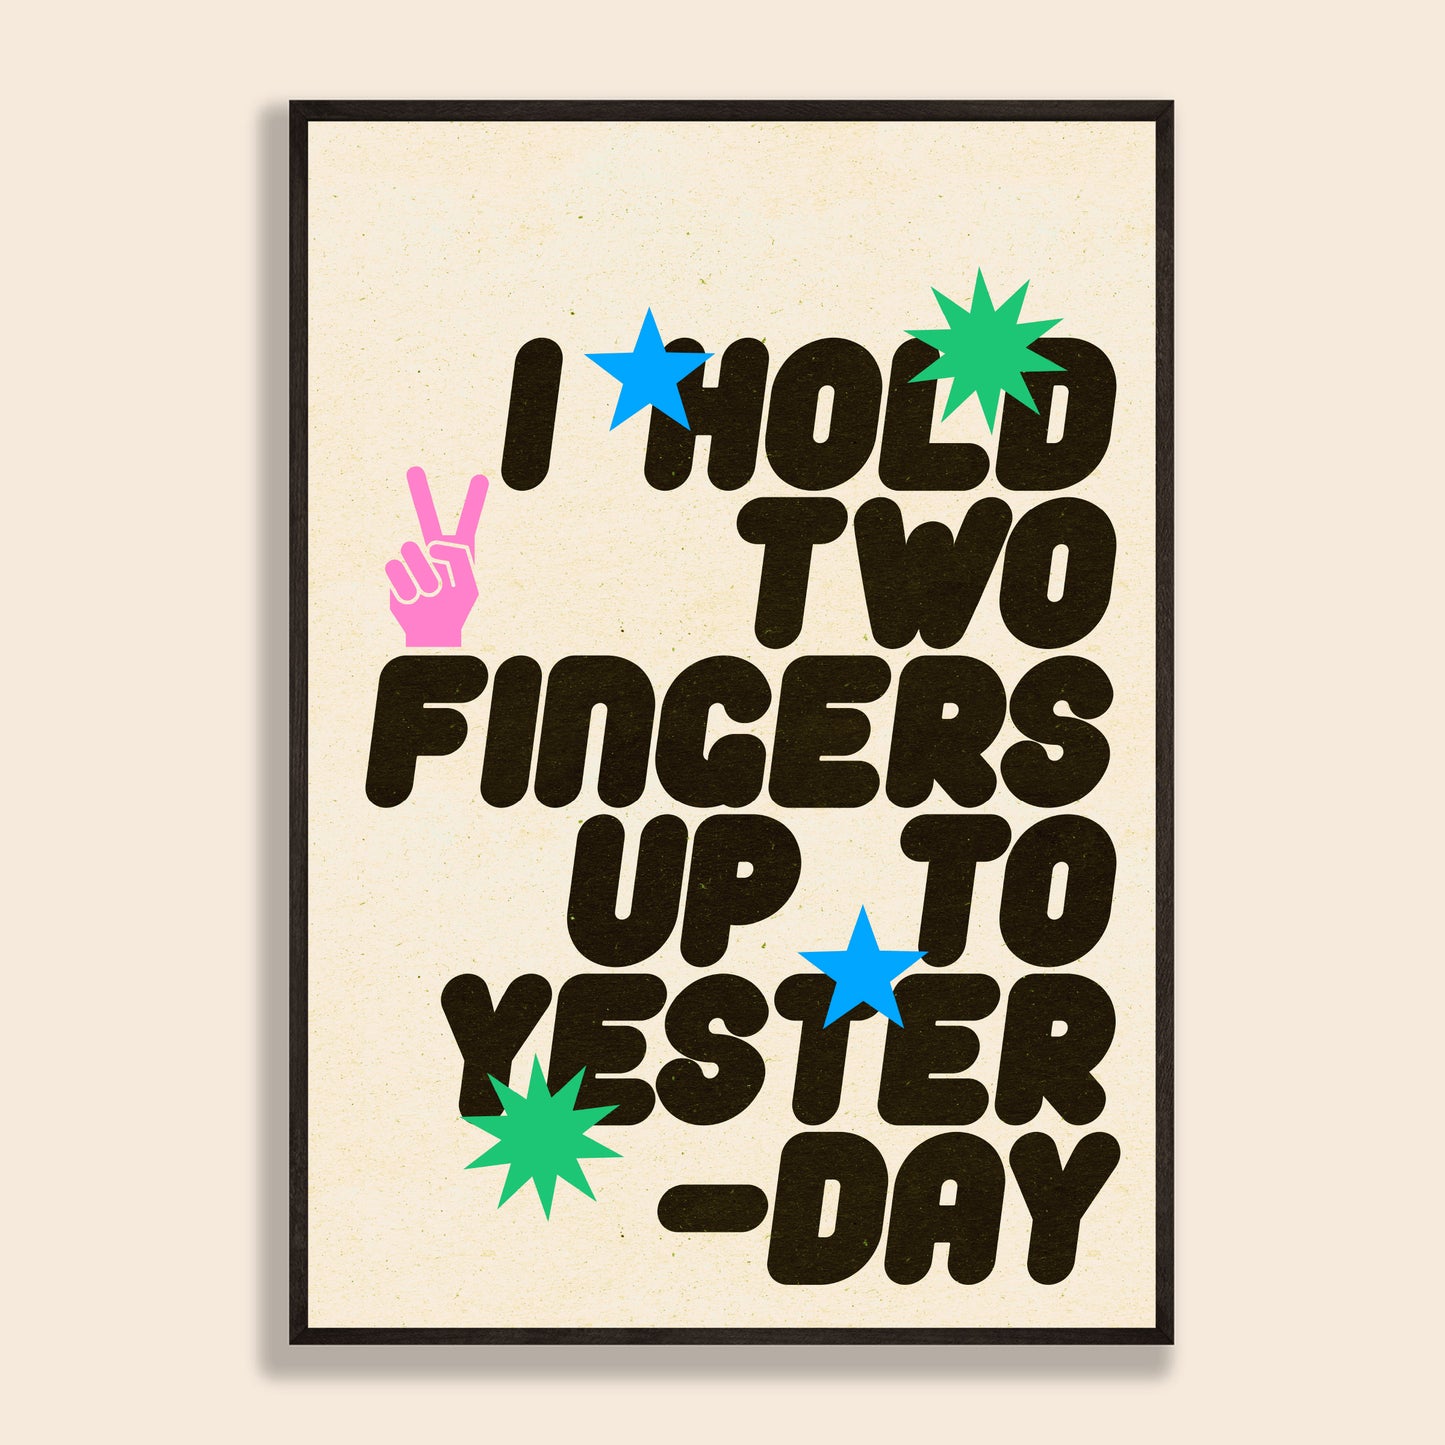 Two Fingers Print